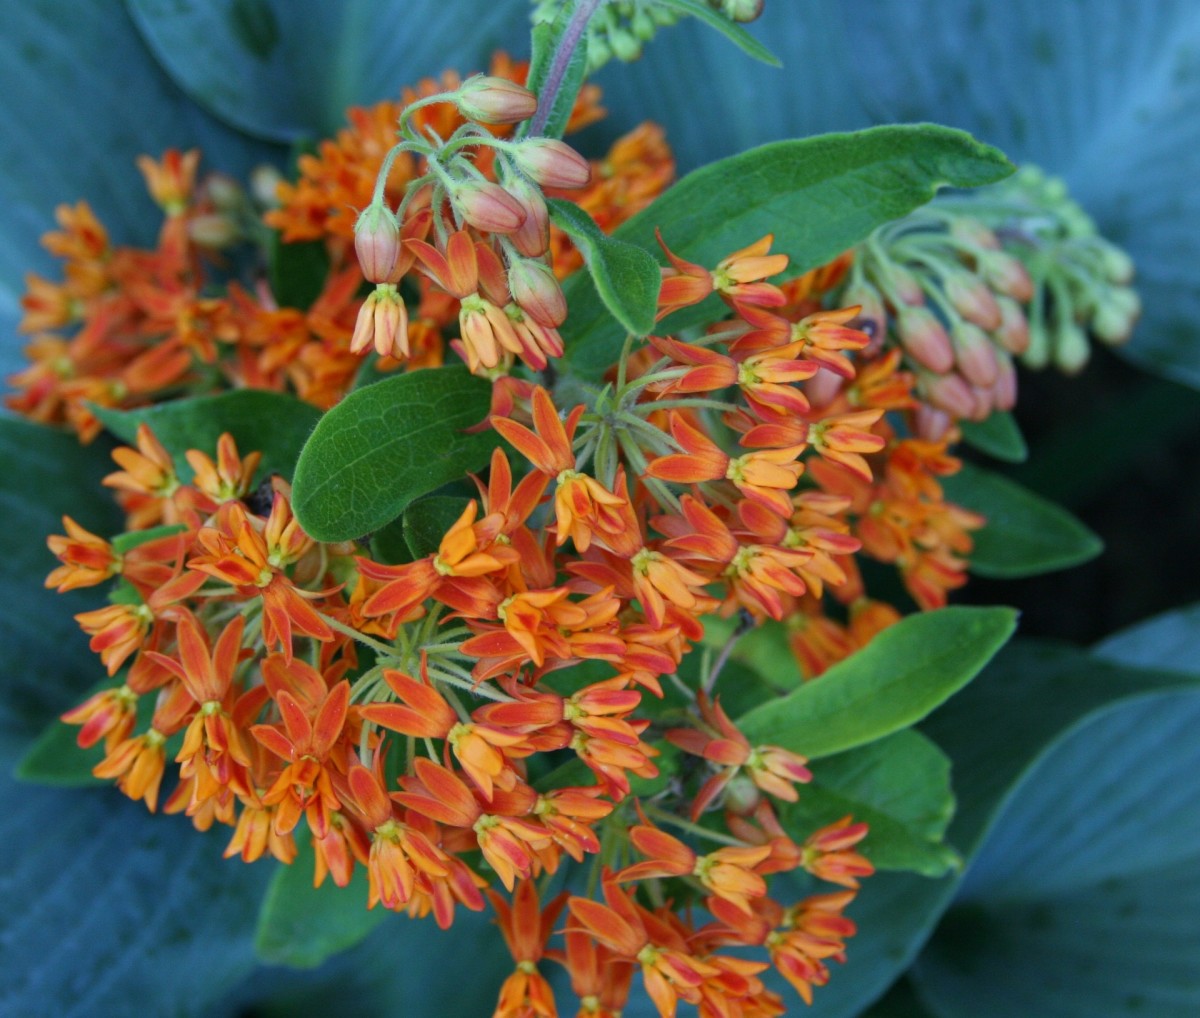 As the name implies, Butterfly weed attracts butterflies and other winged insects to your yard.